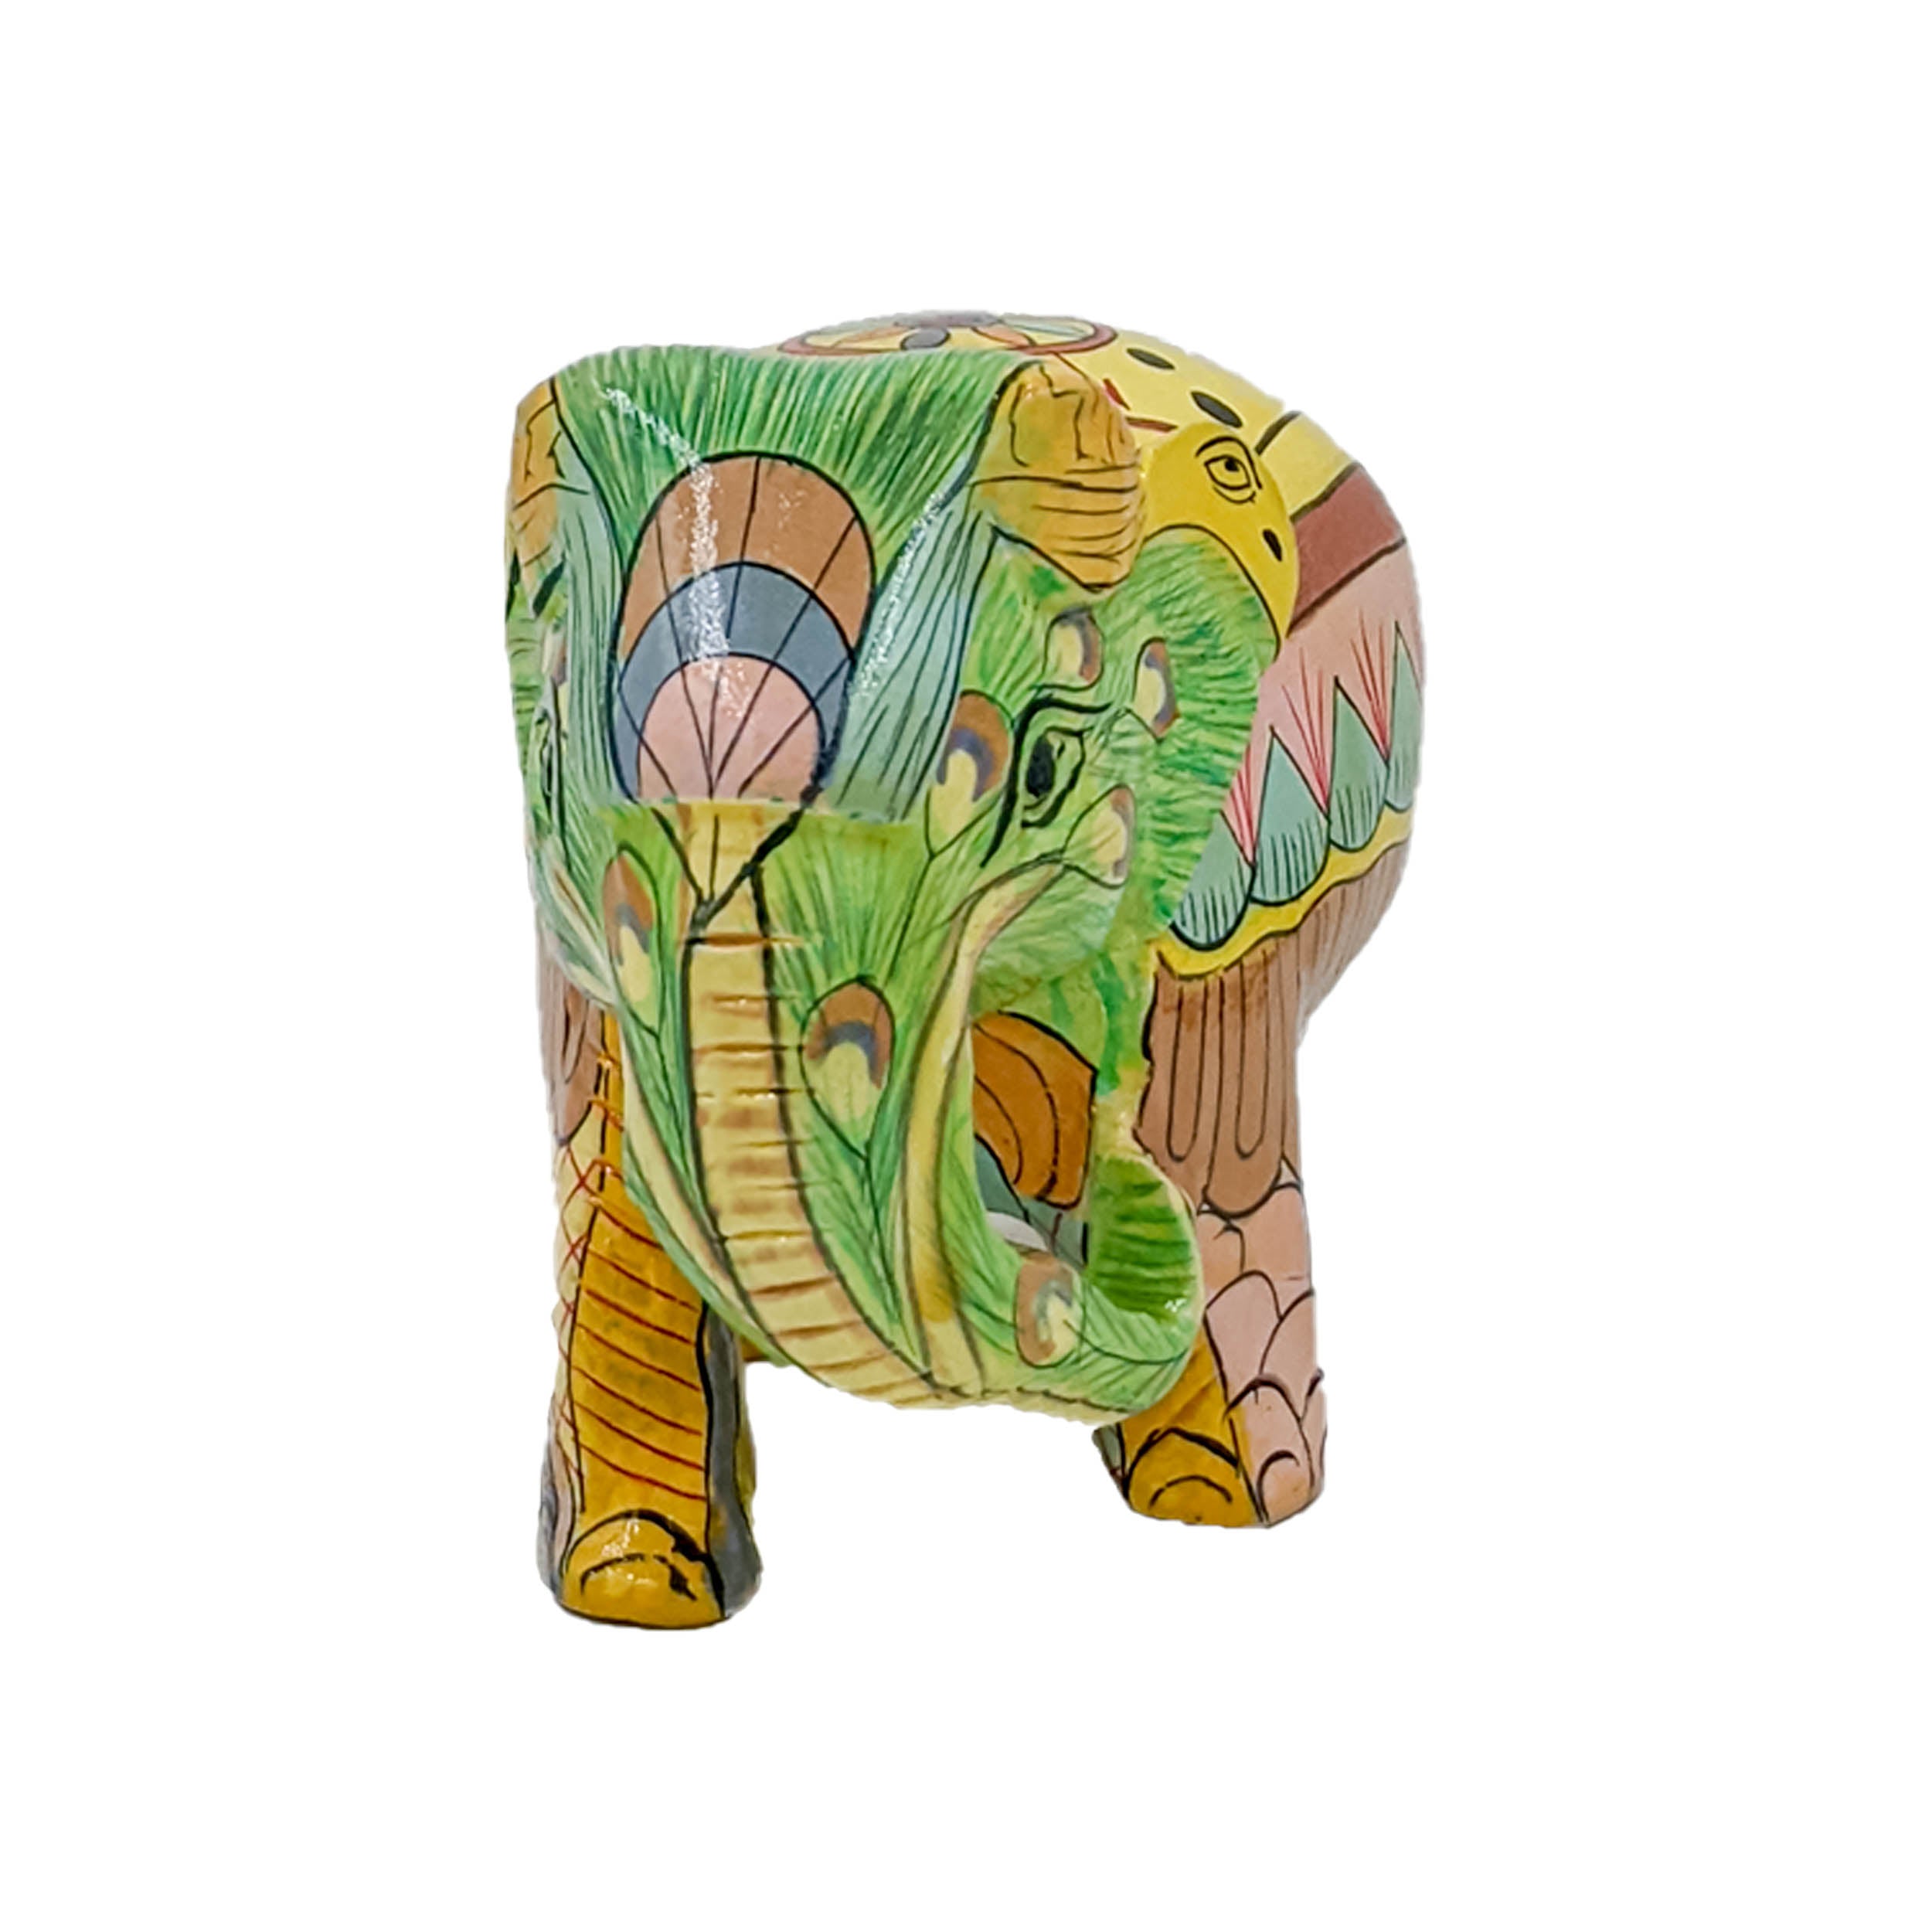 Wooden Handicraft Painted Carved Elephant 3-Inch